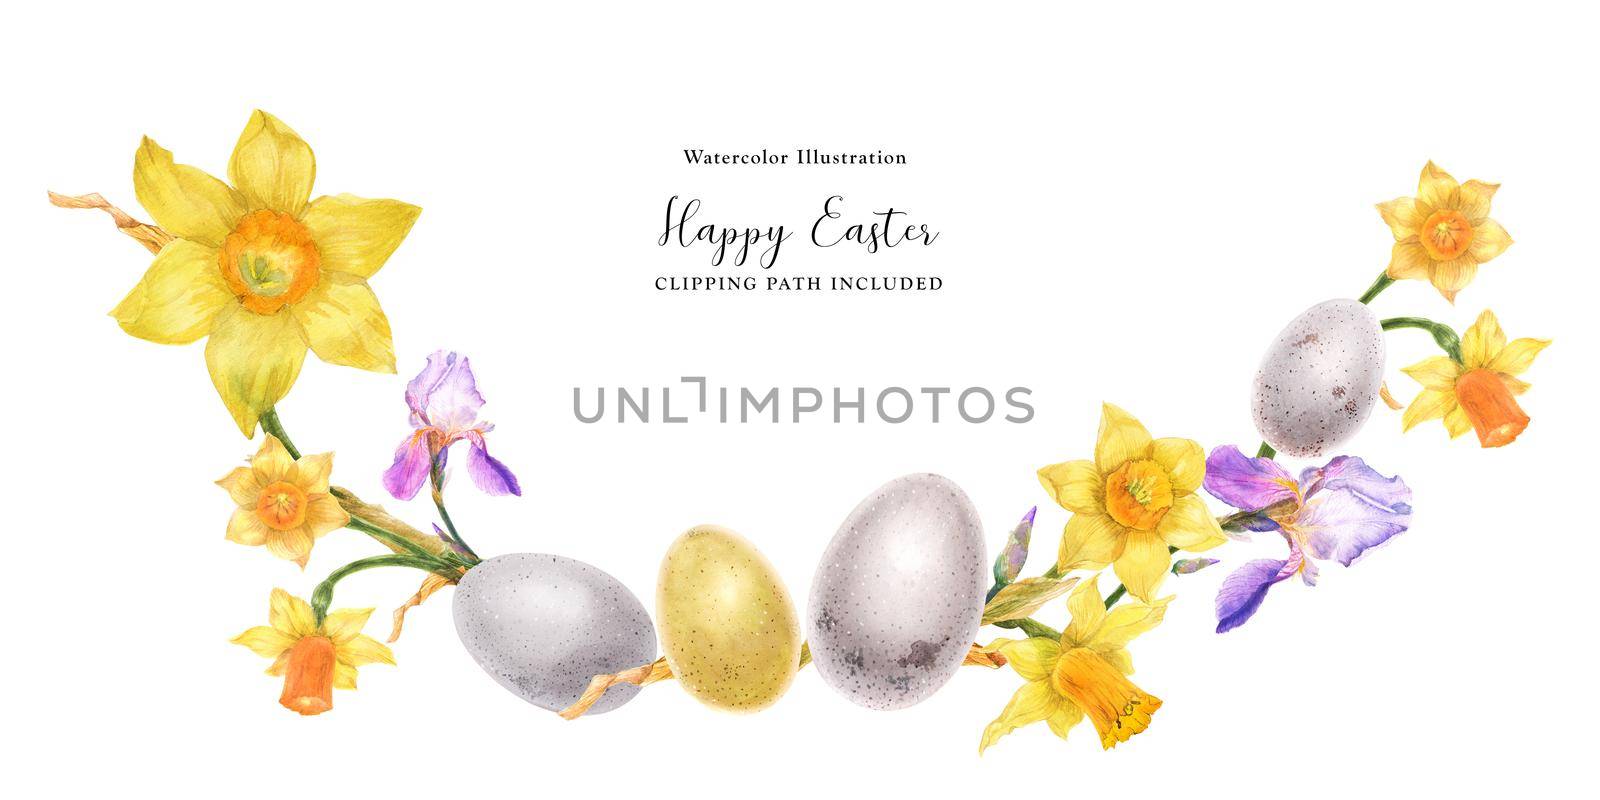 Easter watercolor arc with daffodil and iris flowers and bird eggs by Xeniasnowstorm